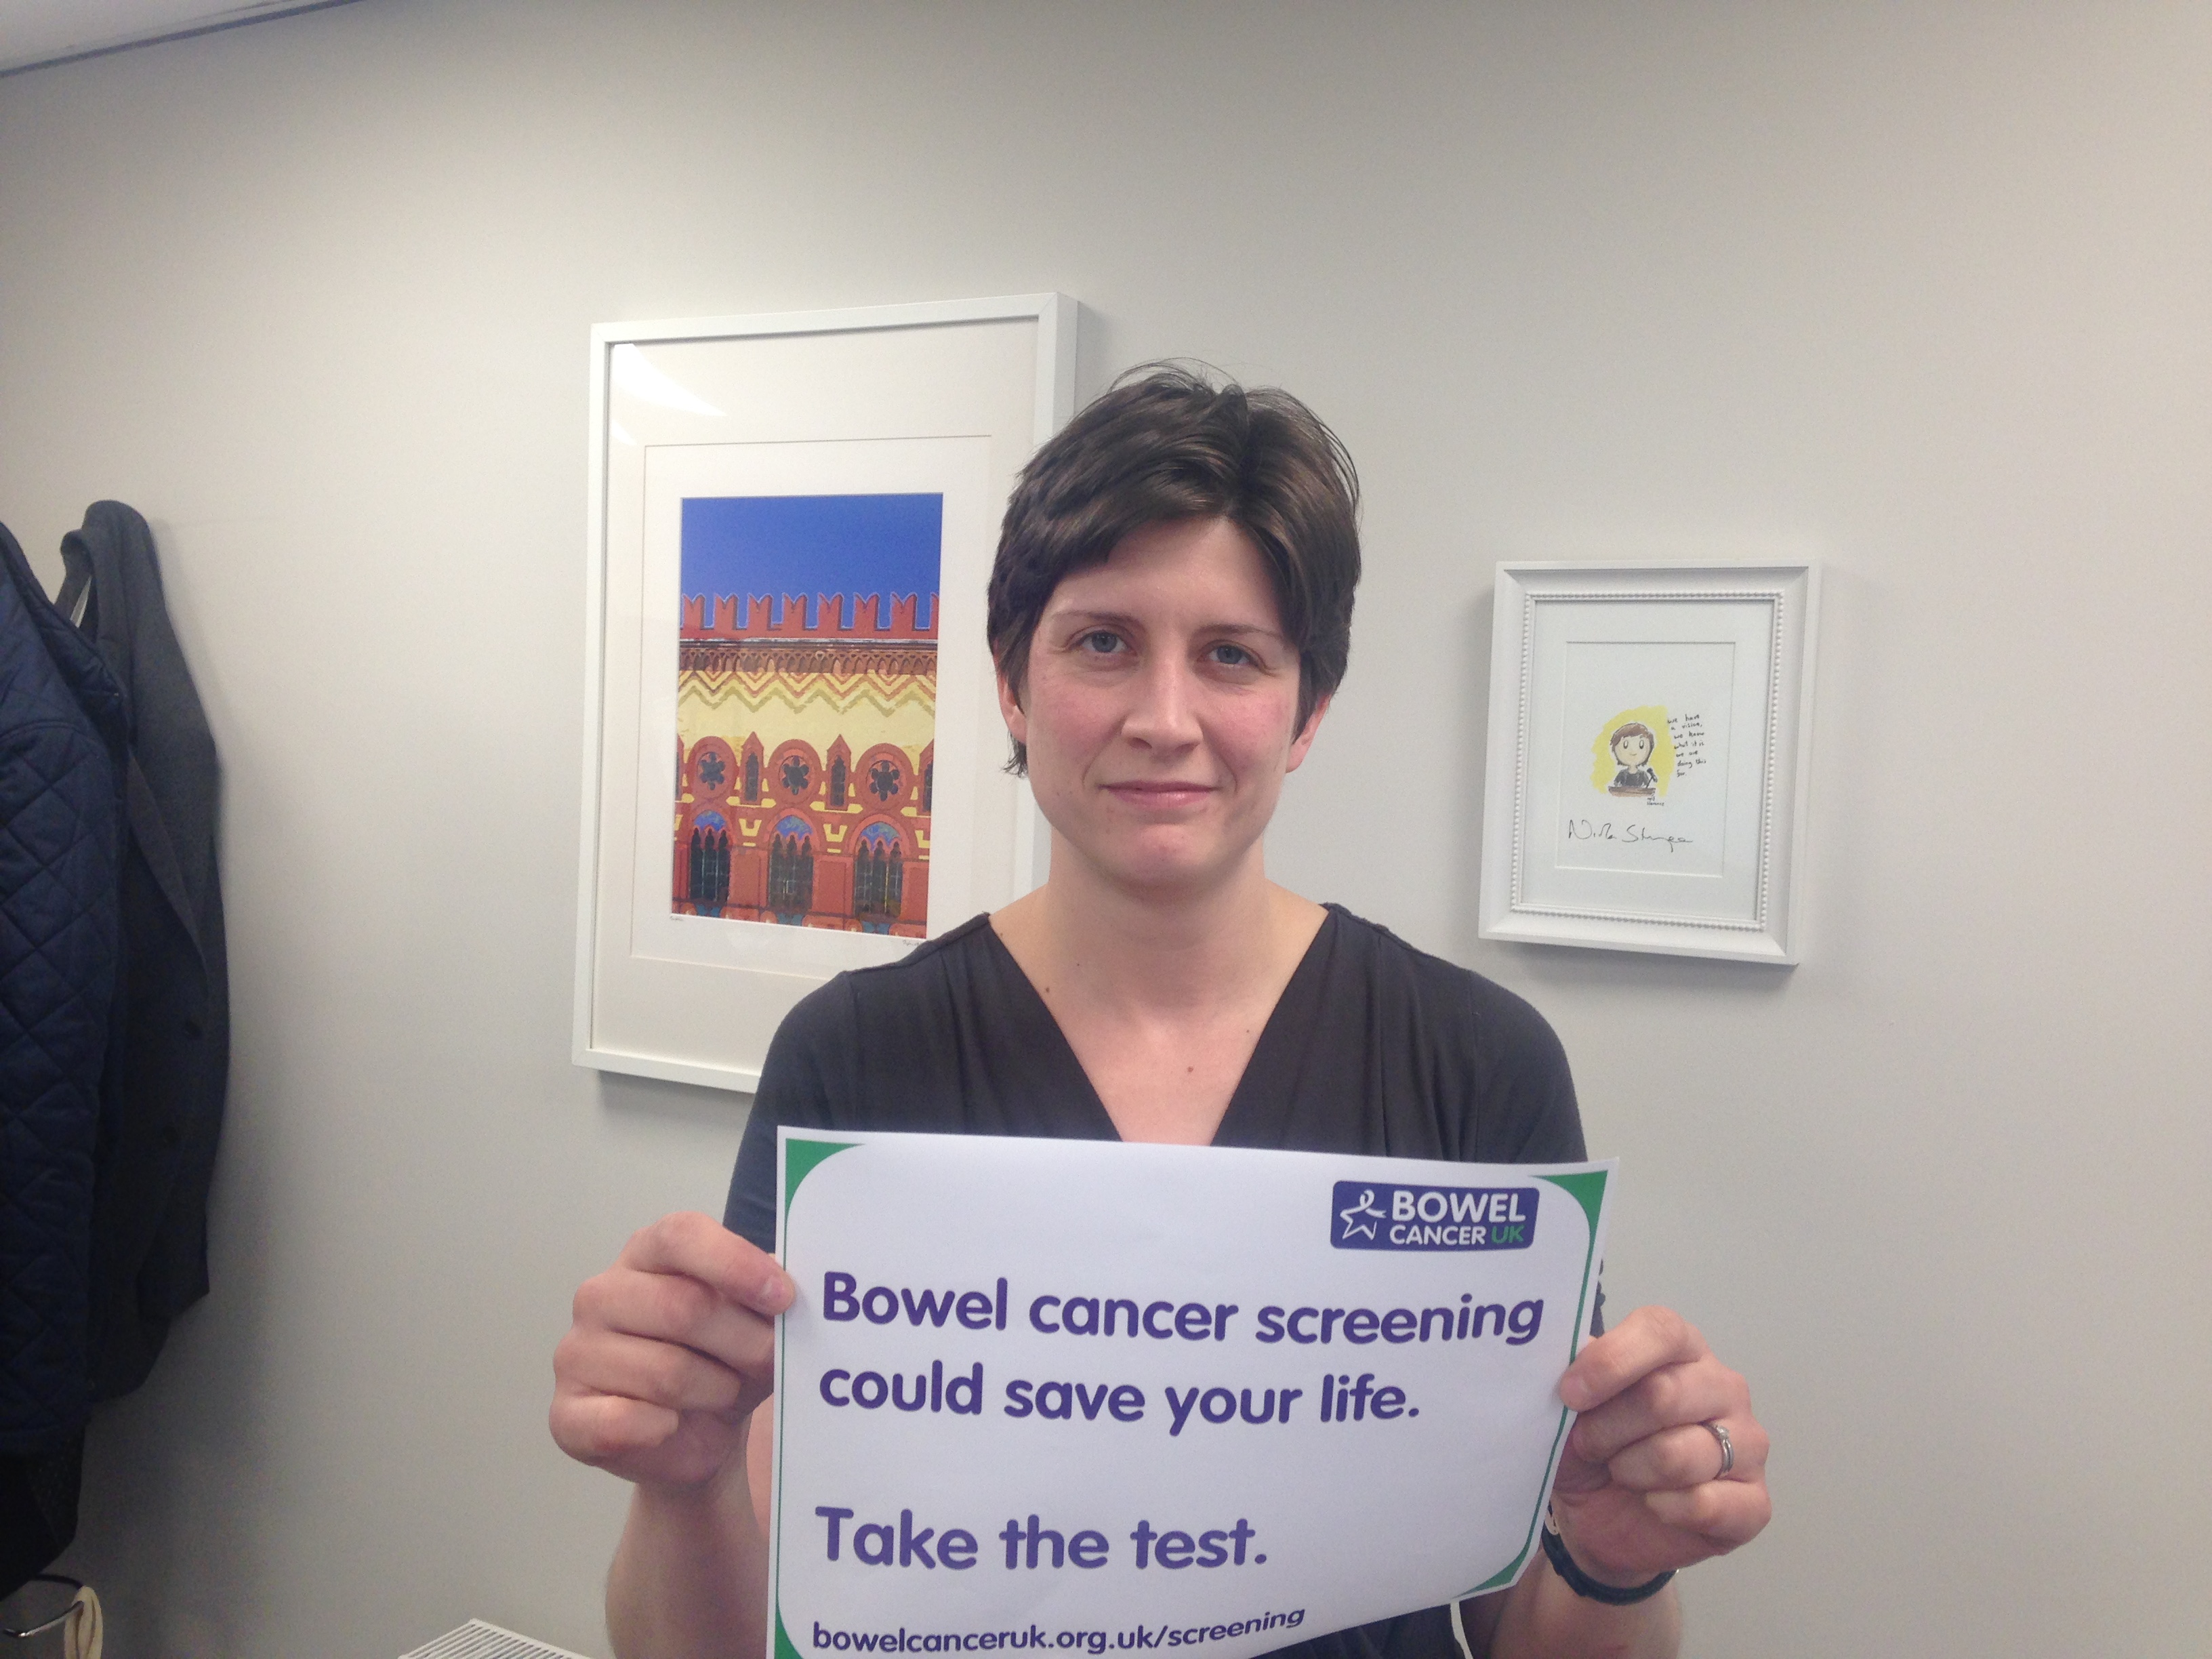 Alison Thewliss MP pledges to raise awareness of screening in Bowel Cancer Awareness Month